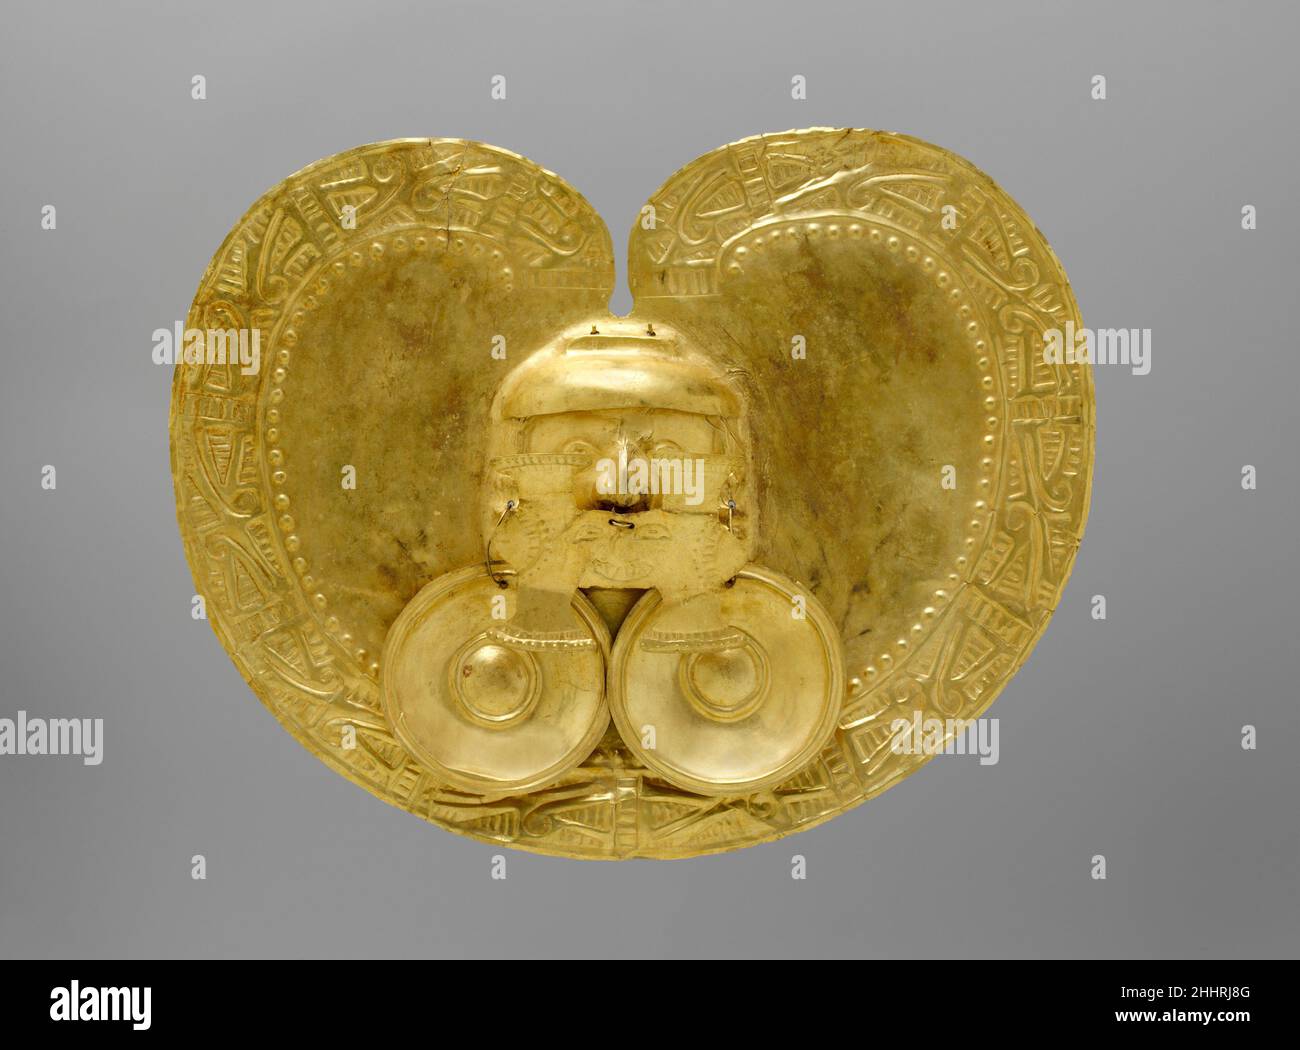 Pectoral with Face 1st–7th century Calima (Yotoco) A large H-shaped nose pendant almost entirely obscures the face at the center of this gold, kidney-shaped pectoral. Both the shape of the pectoral and the form of the nose pendant are hallmarks of Yotoco-period Calima art. The Yotoco period was the second of three societies—Ilama, Yotoco-Malagana, and Sonso—to successively occupy the Cauca Valley region in west-central Colombia. The three societies are known collectively as the Calima culture. The upper portions of the eyes are just visible above the H-shaped pendant, and the head itself is su Stock Photo